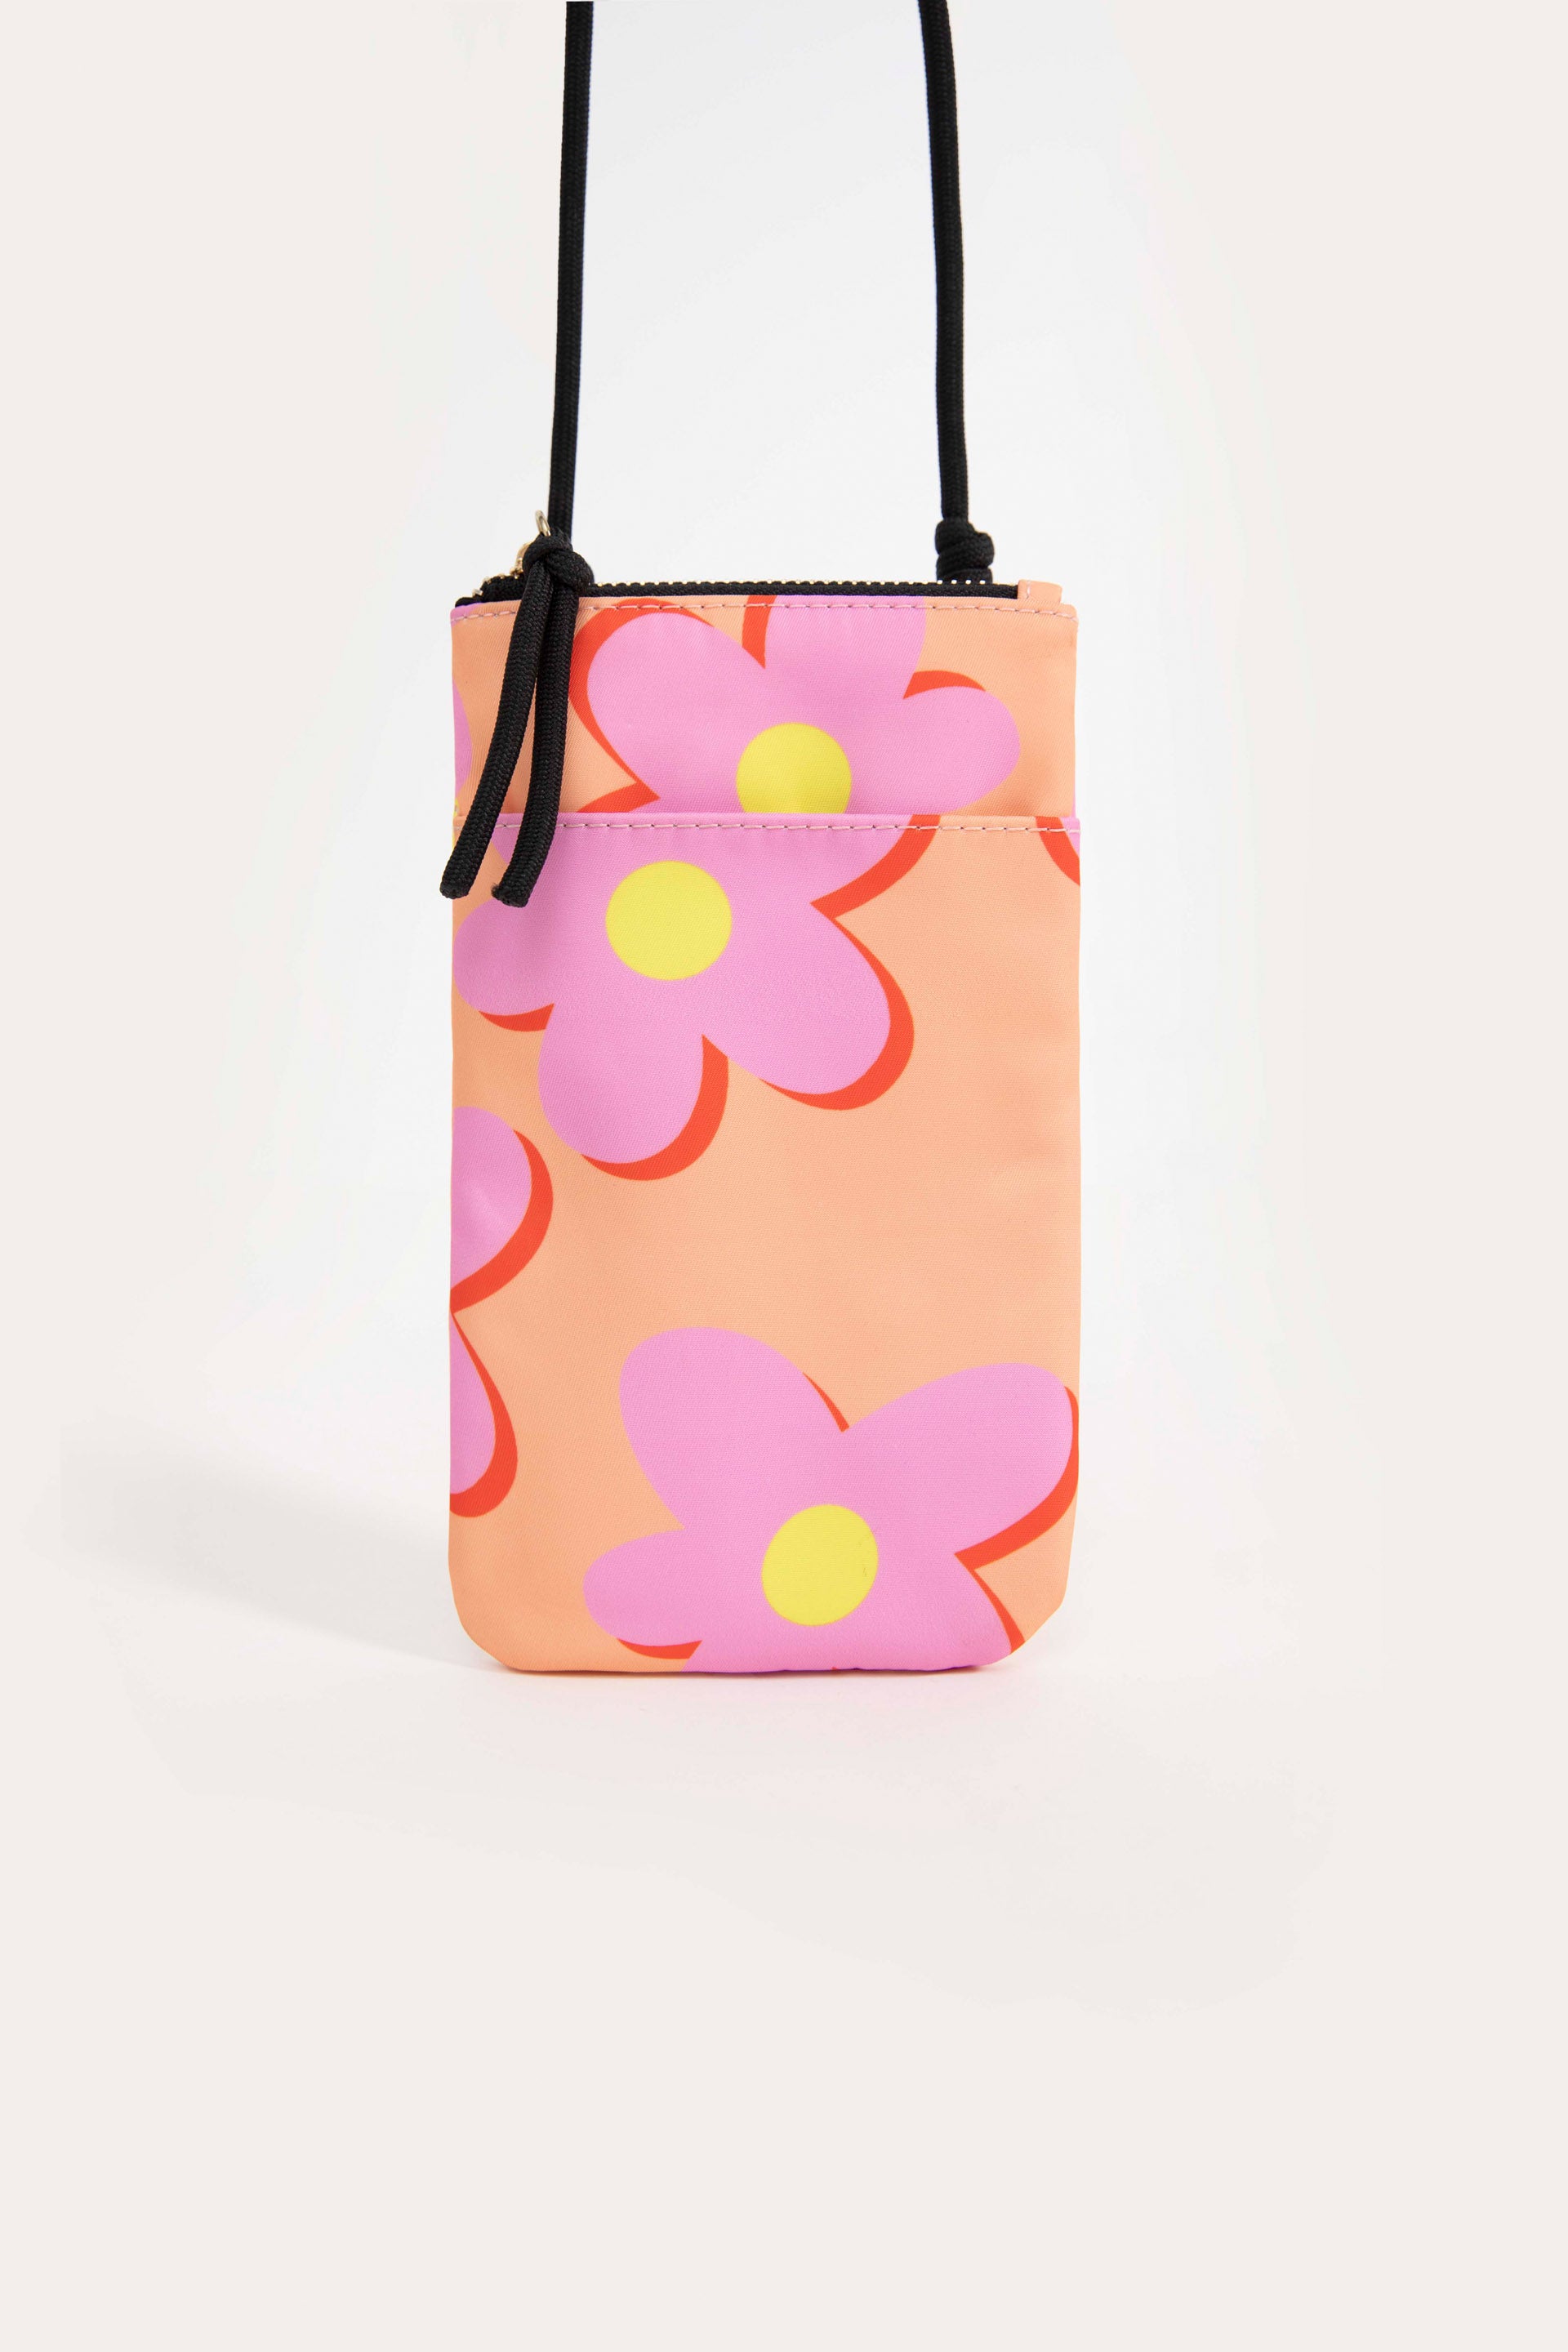 UO Square Mini Messenger Bag | Urban Outfitters Japan - Clothing, Music,  Home & Accessories